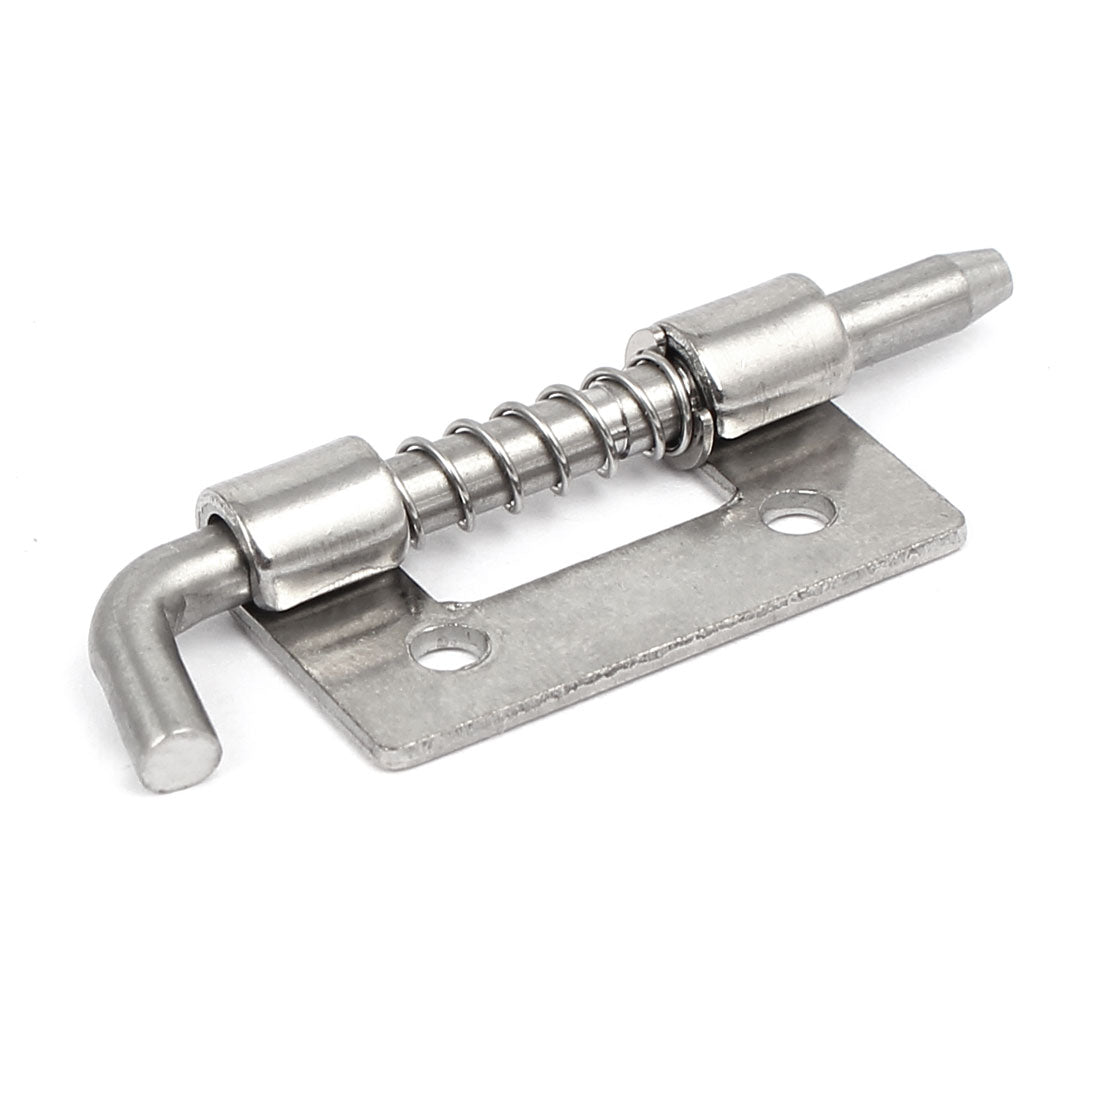 uxcell Uxcell 53mmx18mm 304 Stainless Steel Right Hand Spring Loaded Barrel Bolt Latch